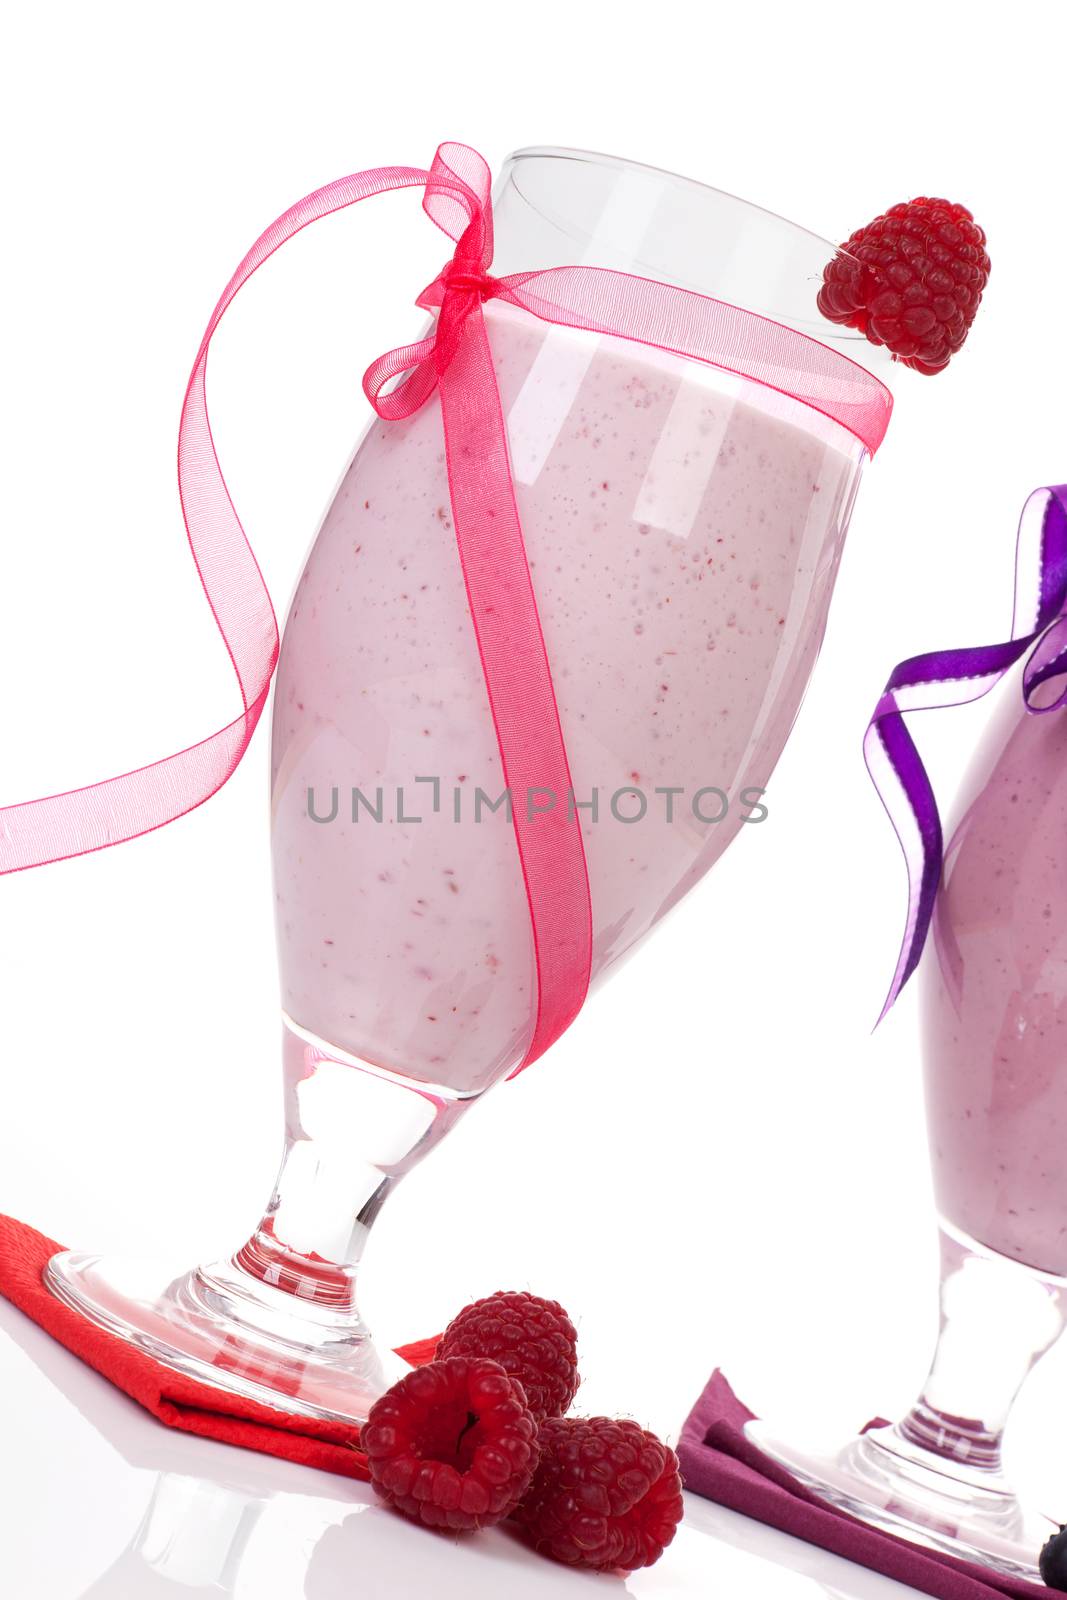 Raspberry yogurt shake with fresh raspberries decorated with pink ribbon isolated on white background. Luxurious summer drinks.